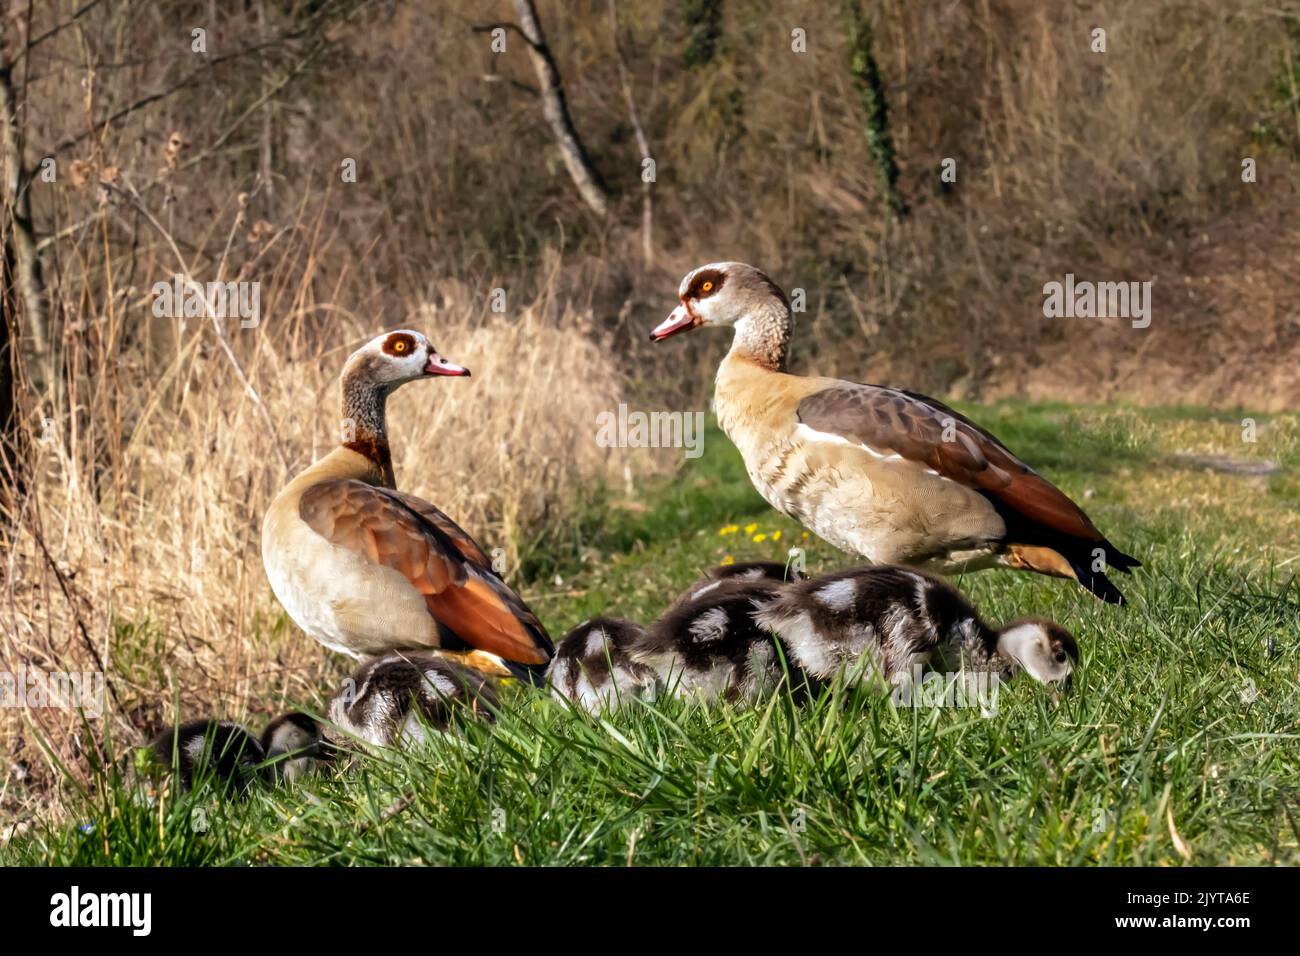 Egyptian goose (Alopochen aegyptiacus), pair with chicks on grass in spring, Moselle riverbank near Liverdun, Lorraine, France Stock Photo